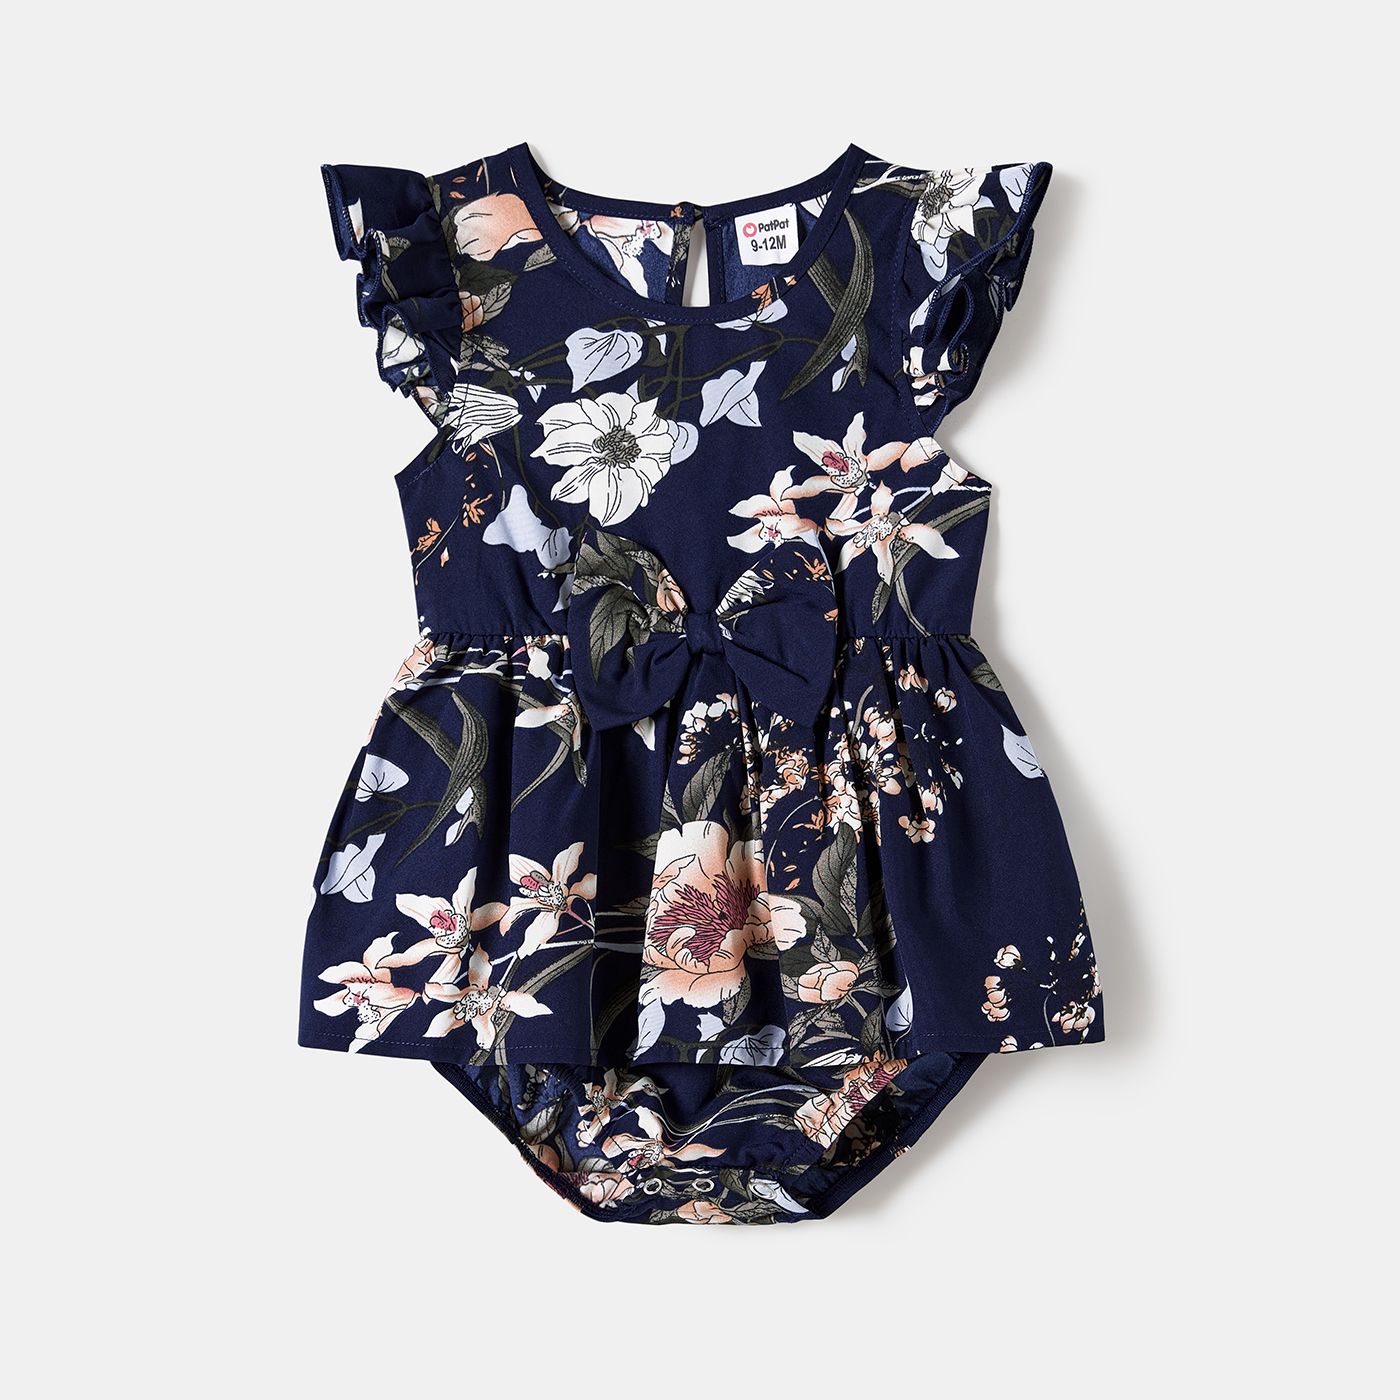 Family Matching Floral Flutter Sleeves Dark Blue Dresses And Colorblock Tops Sets